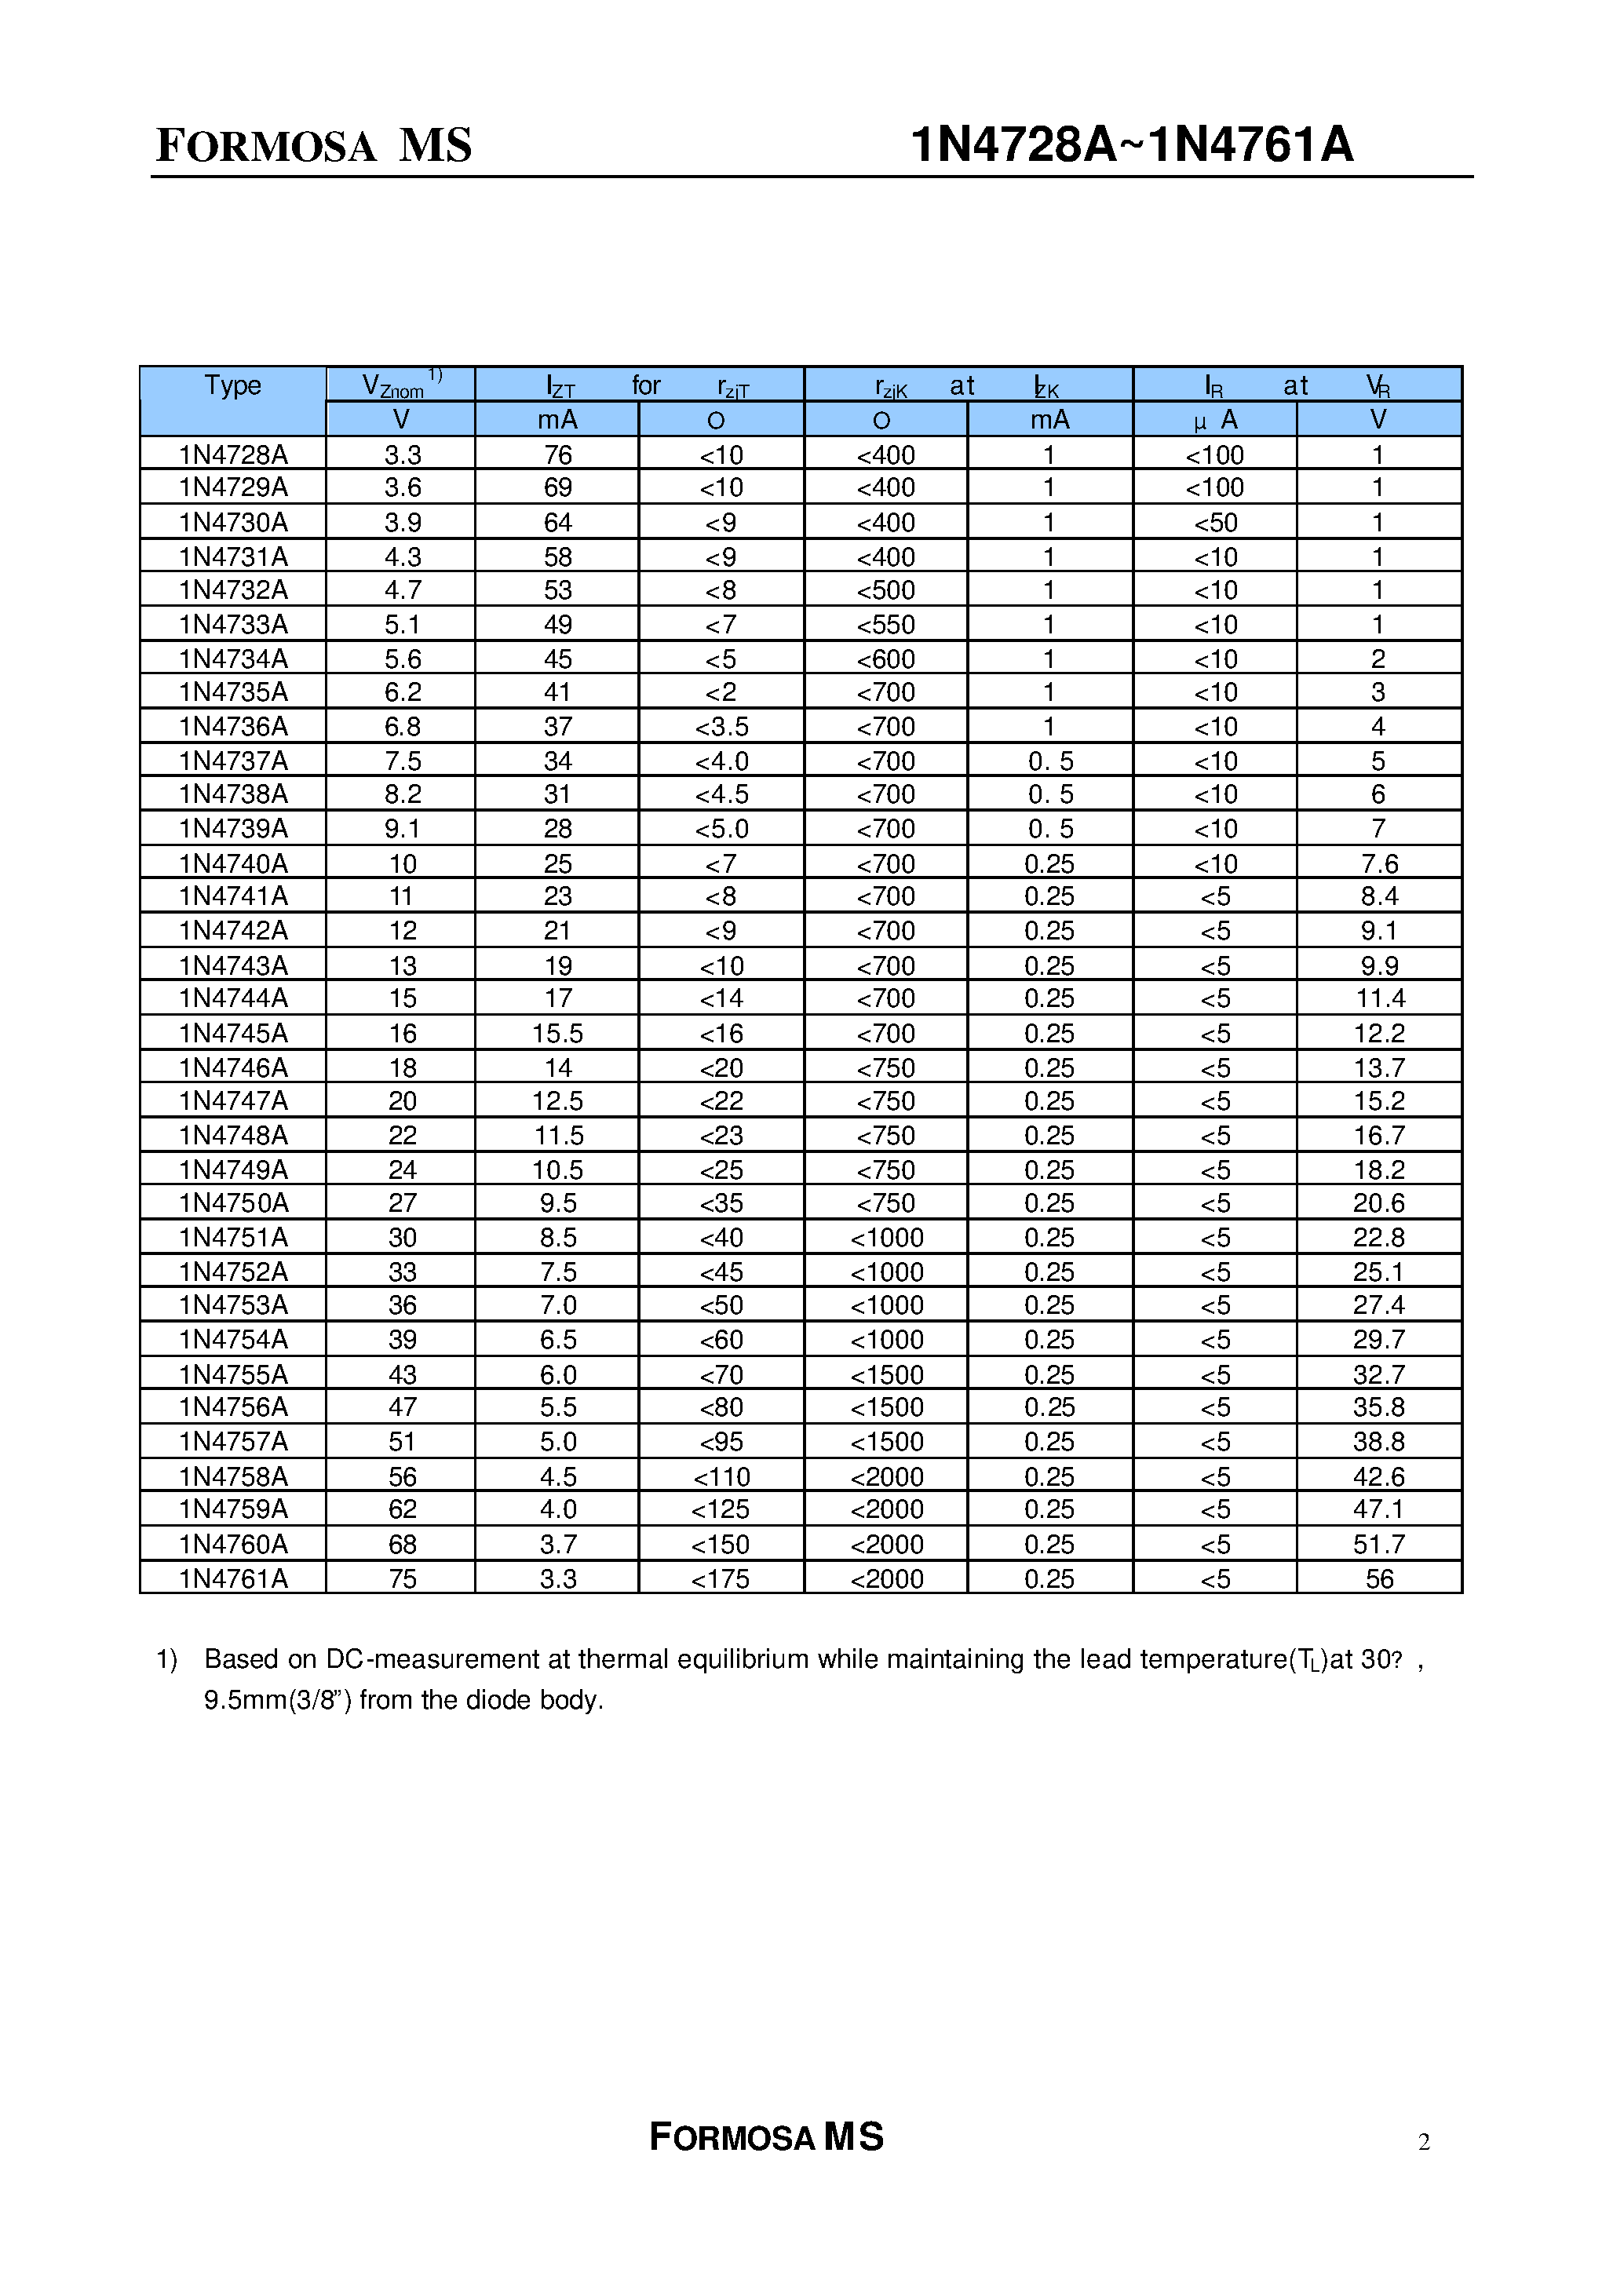 Datasheet 1N4756A - Zener diode page 2